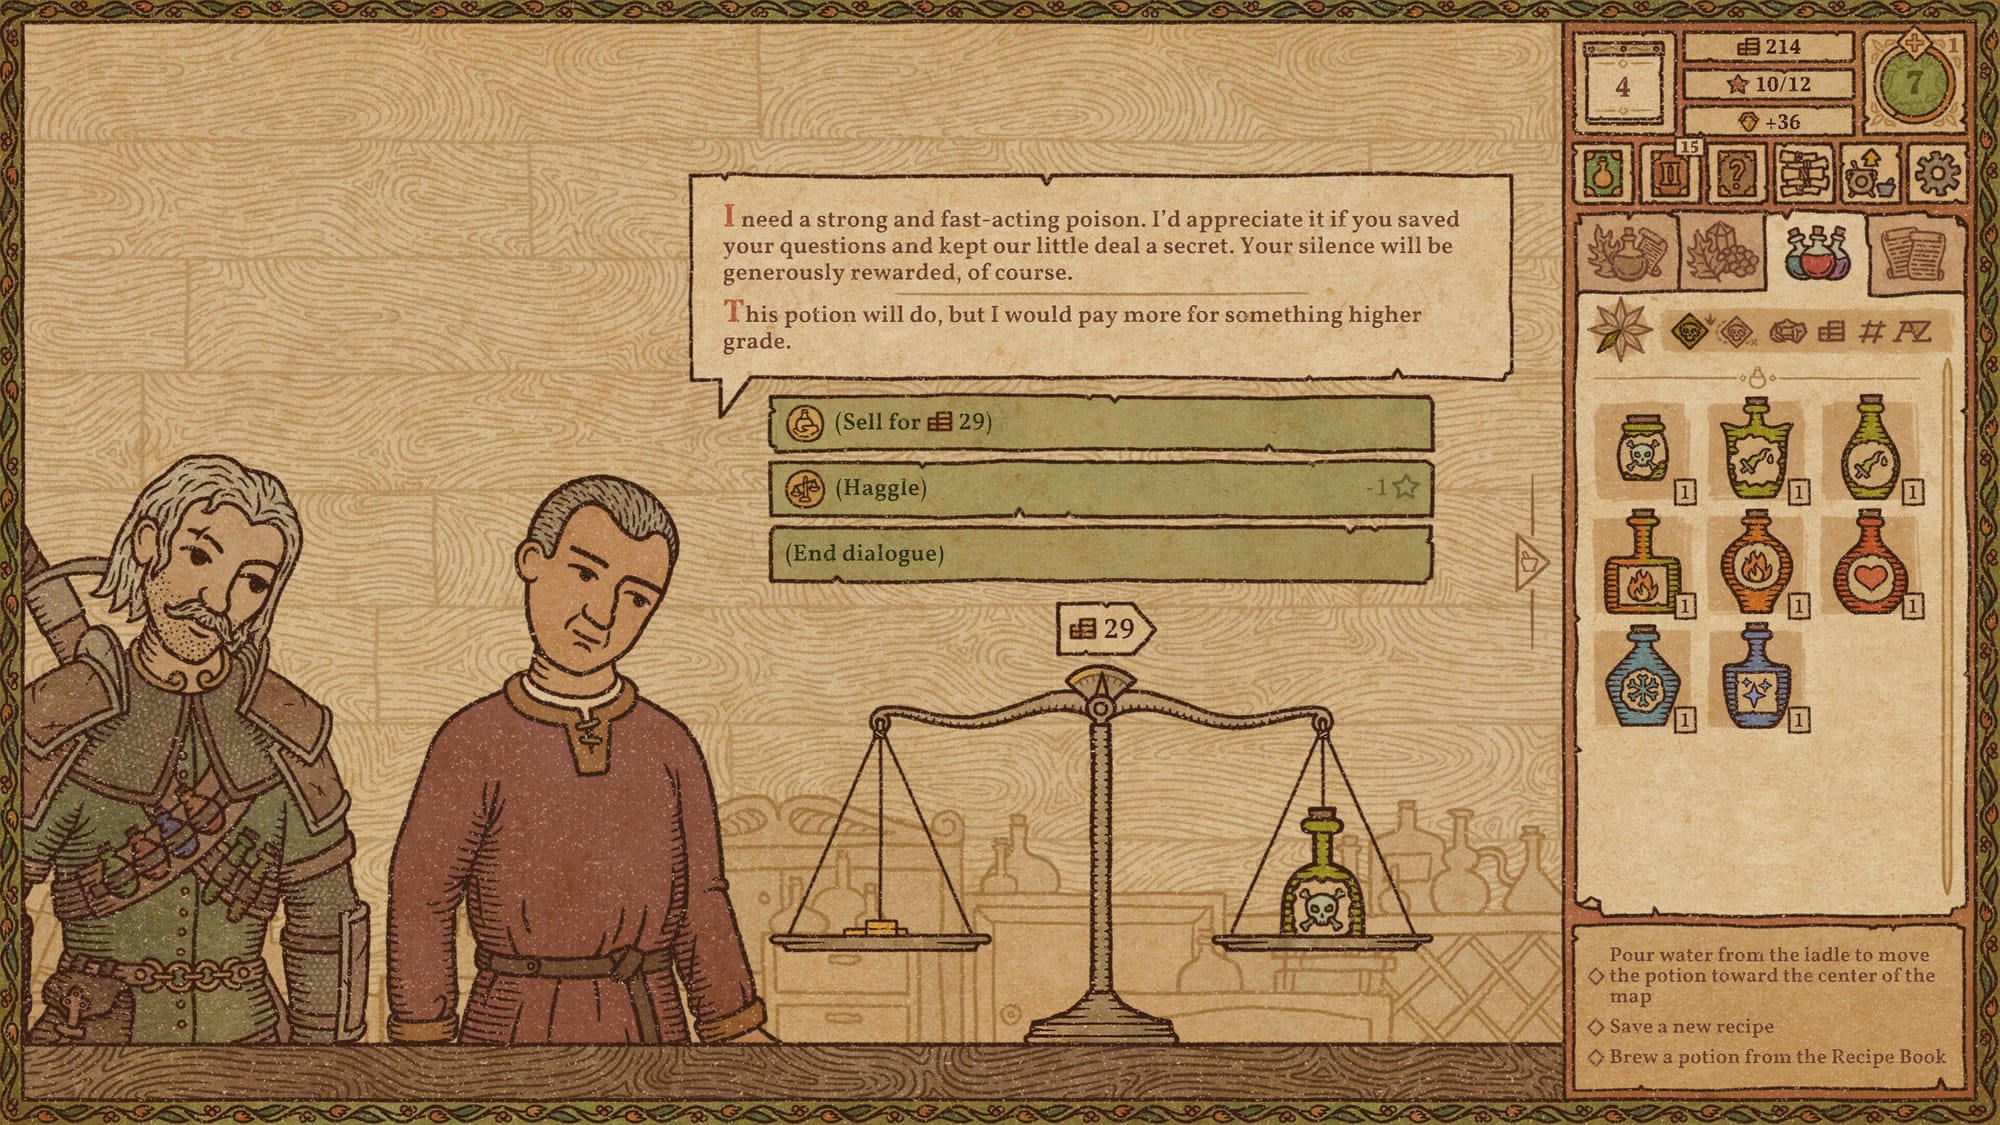 A dialogue screen in Potion Craft where you need to sell a potion to a customer or haggle.